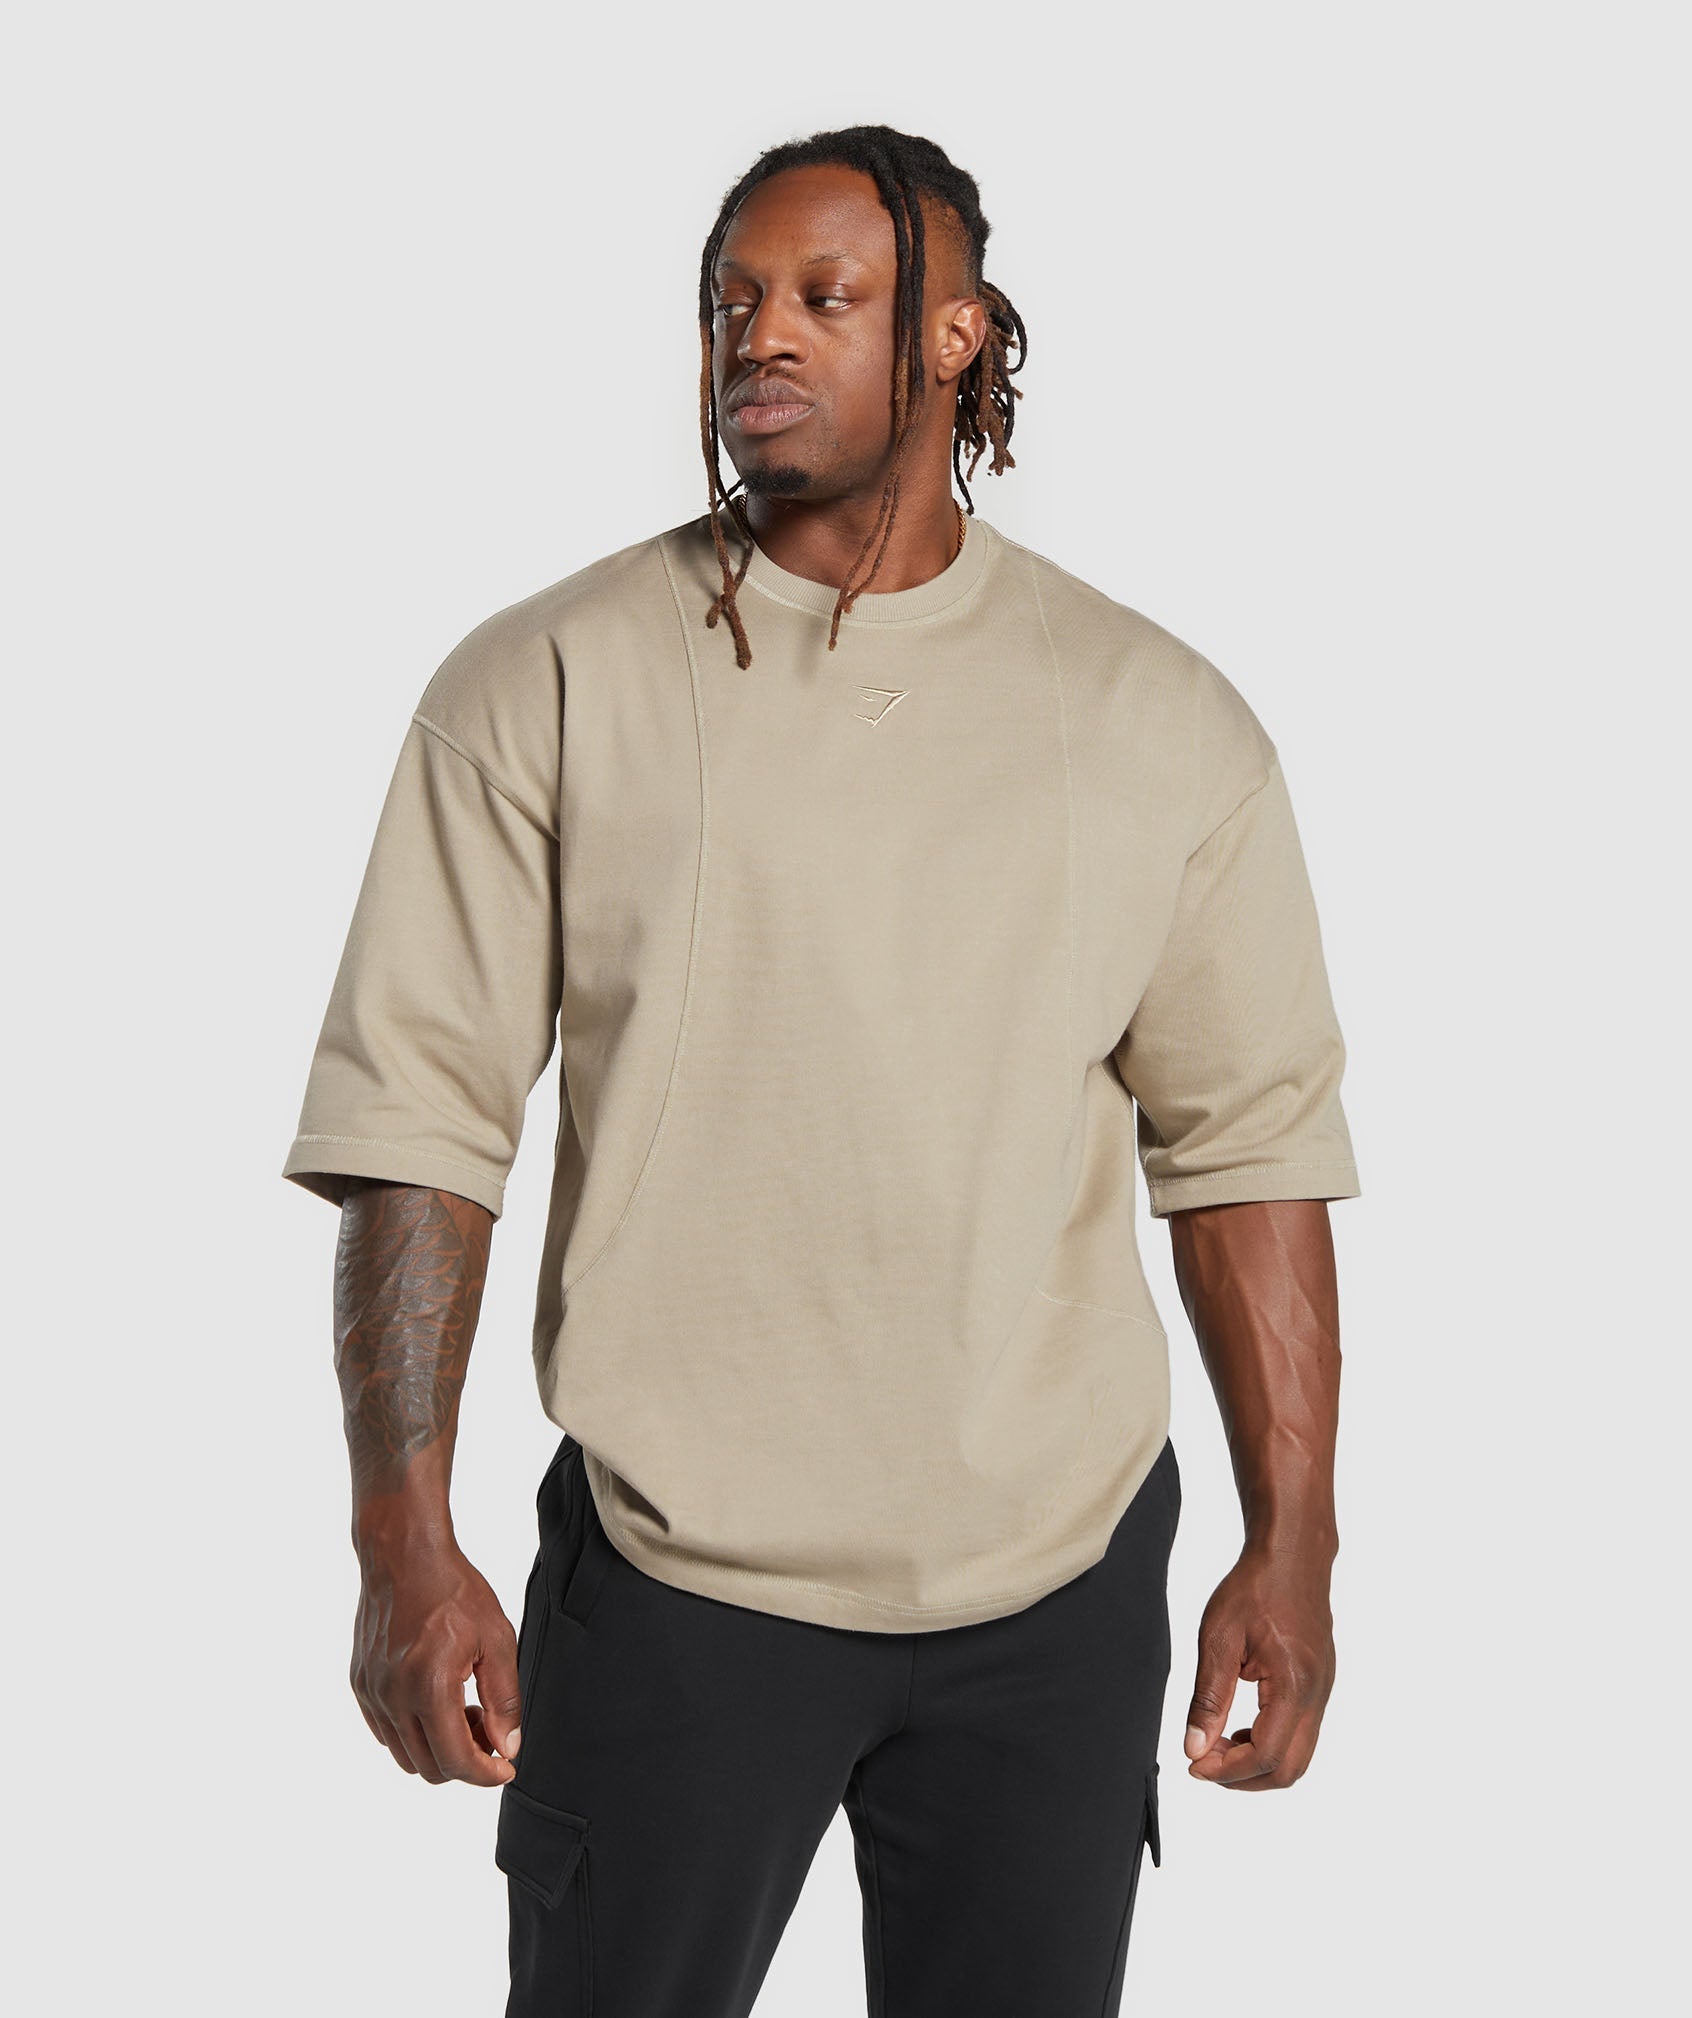 Premium Lifting T-Shirt in Sand Brown - view 1